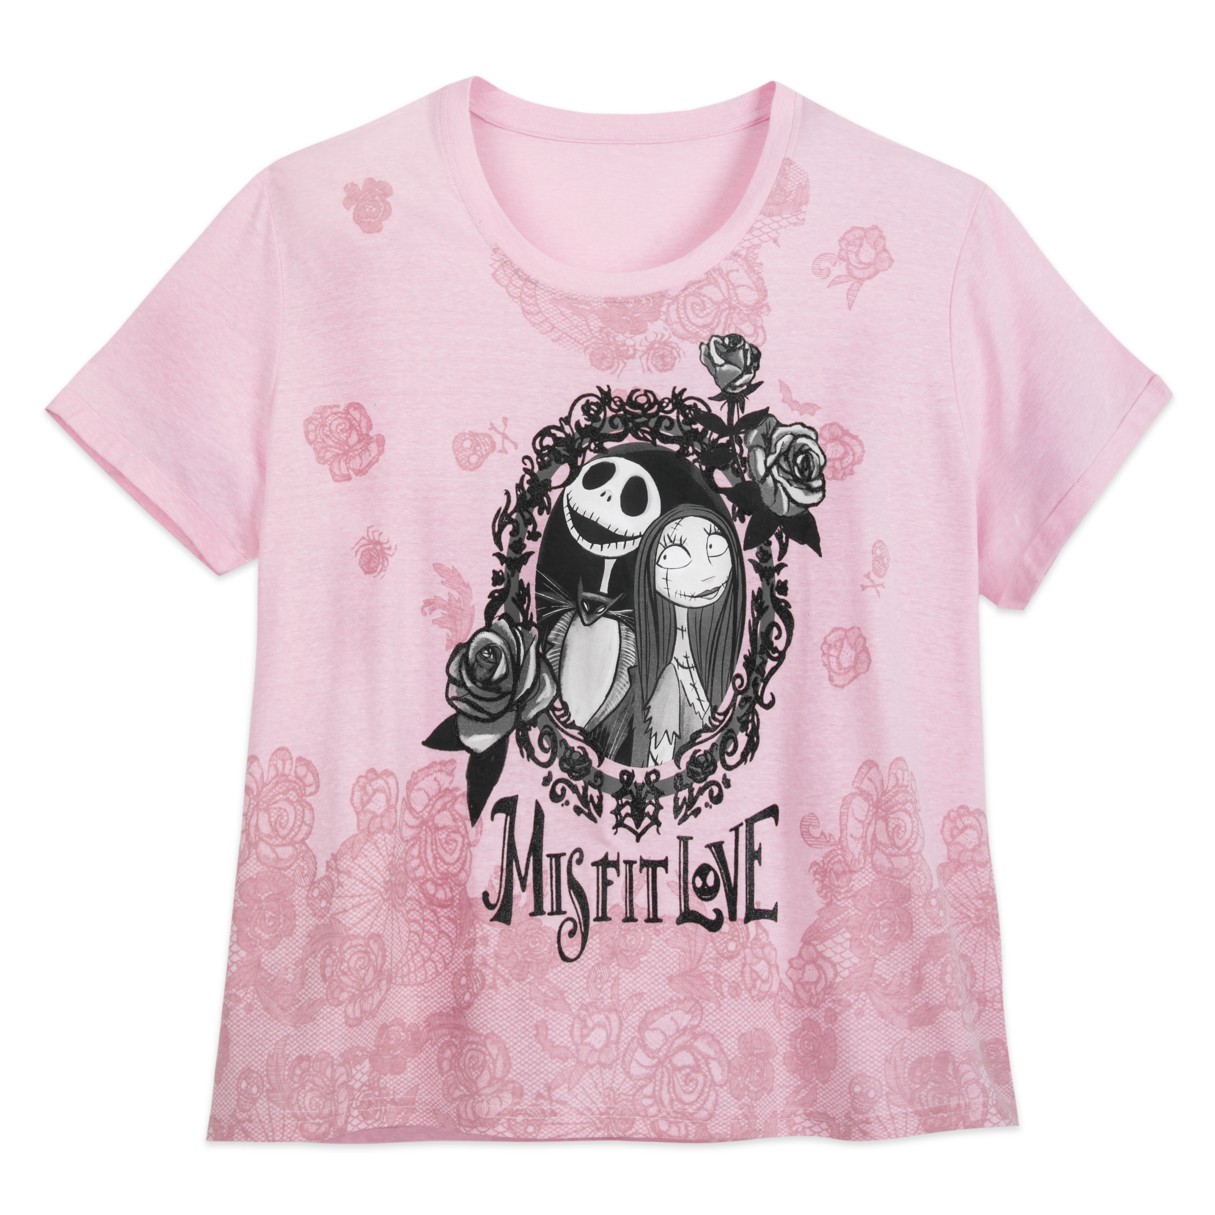 Jack Skellington and Sally T-Shirt for Women – Tim Burton's The Nightmare Before Christmas – Extended Size